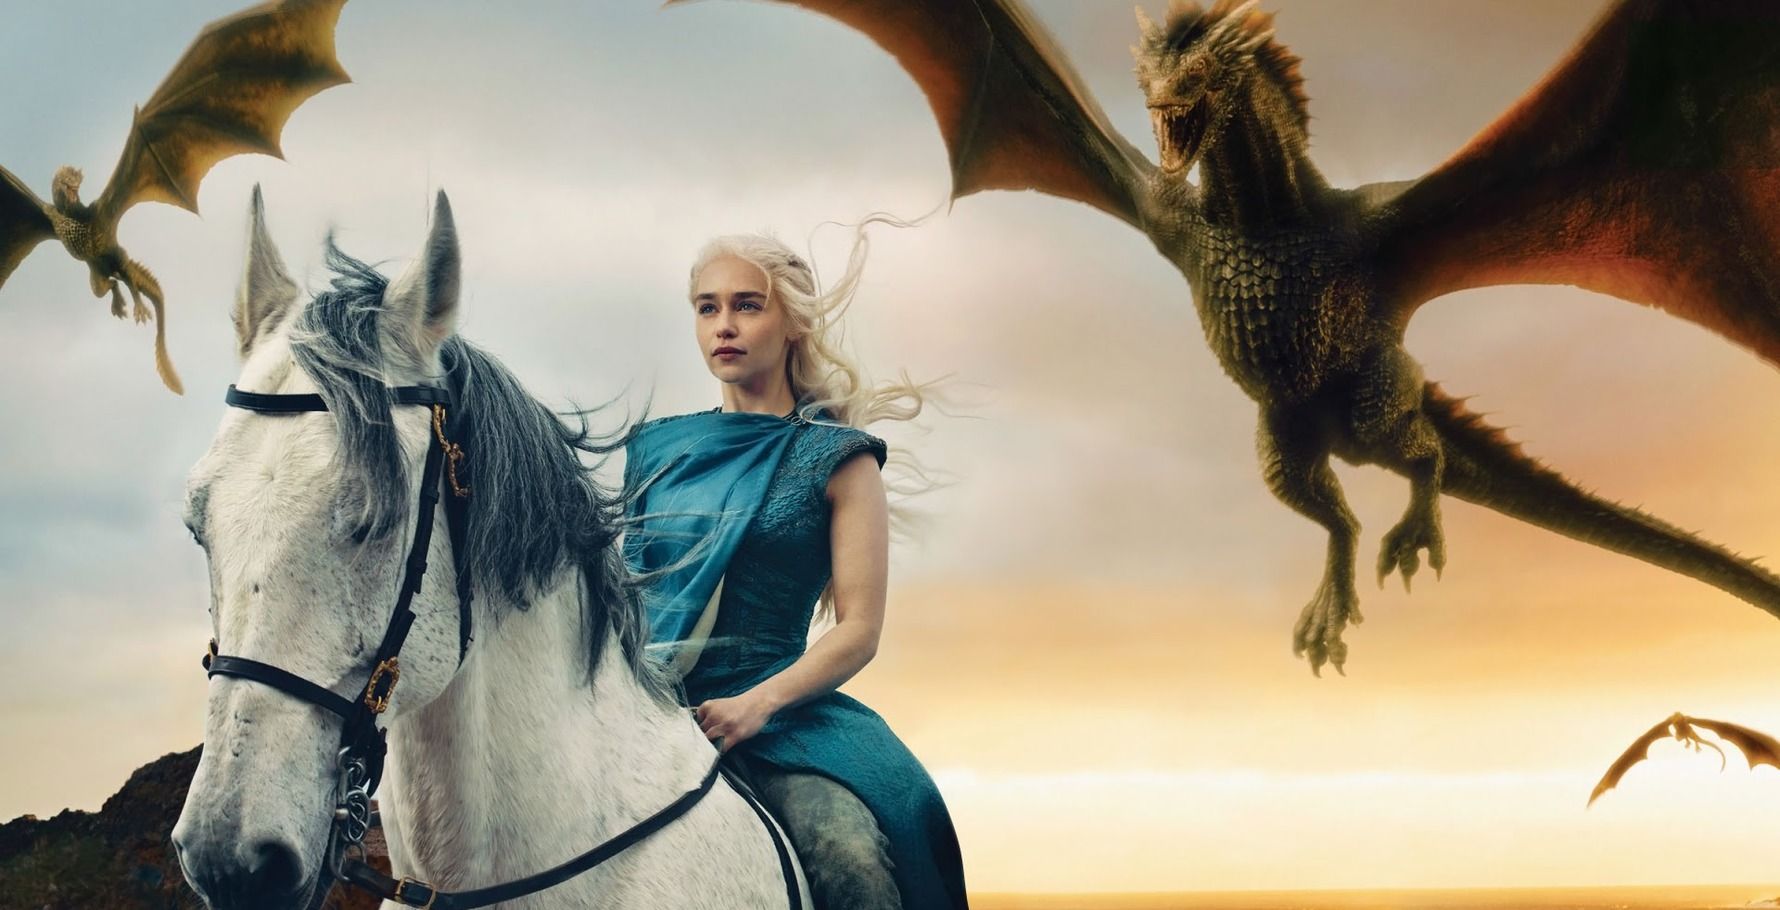 2. Daenerys Targaryen from A Song of Ice and Fire - wide 8